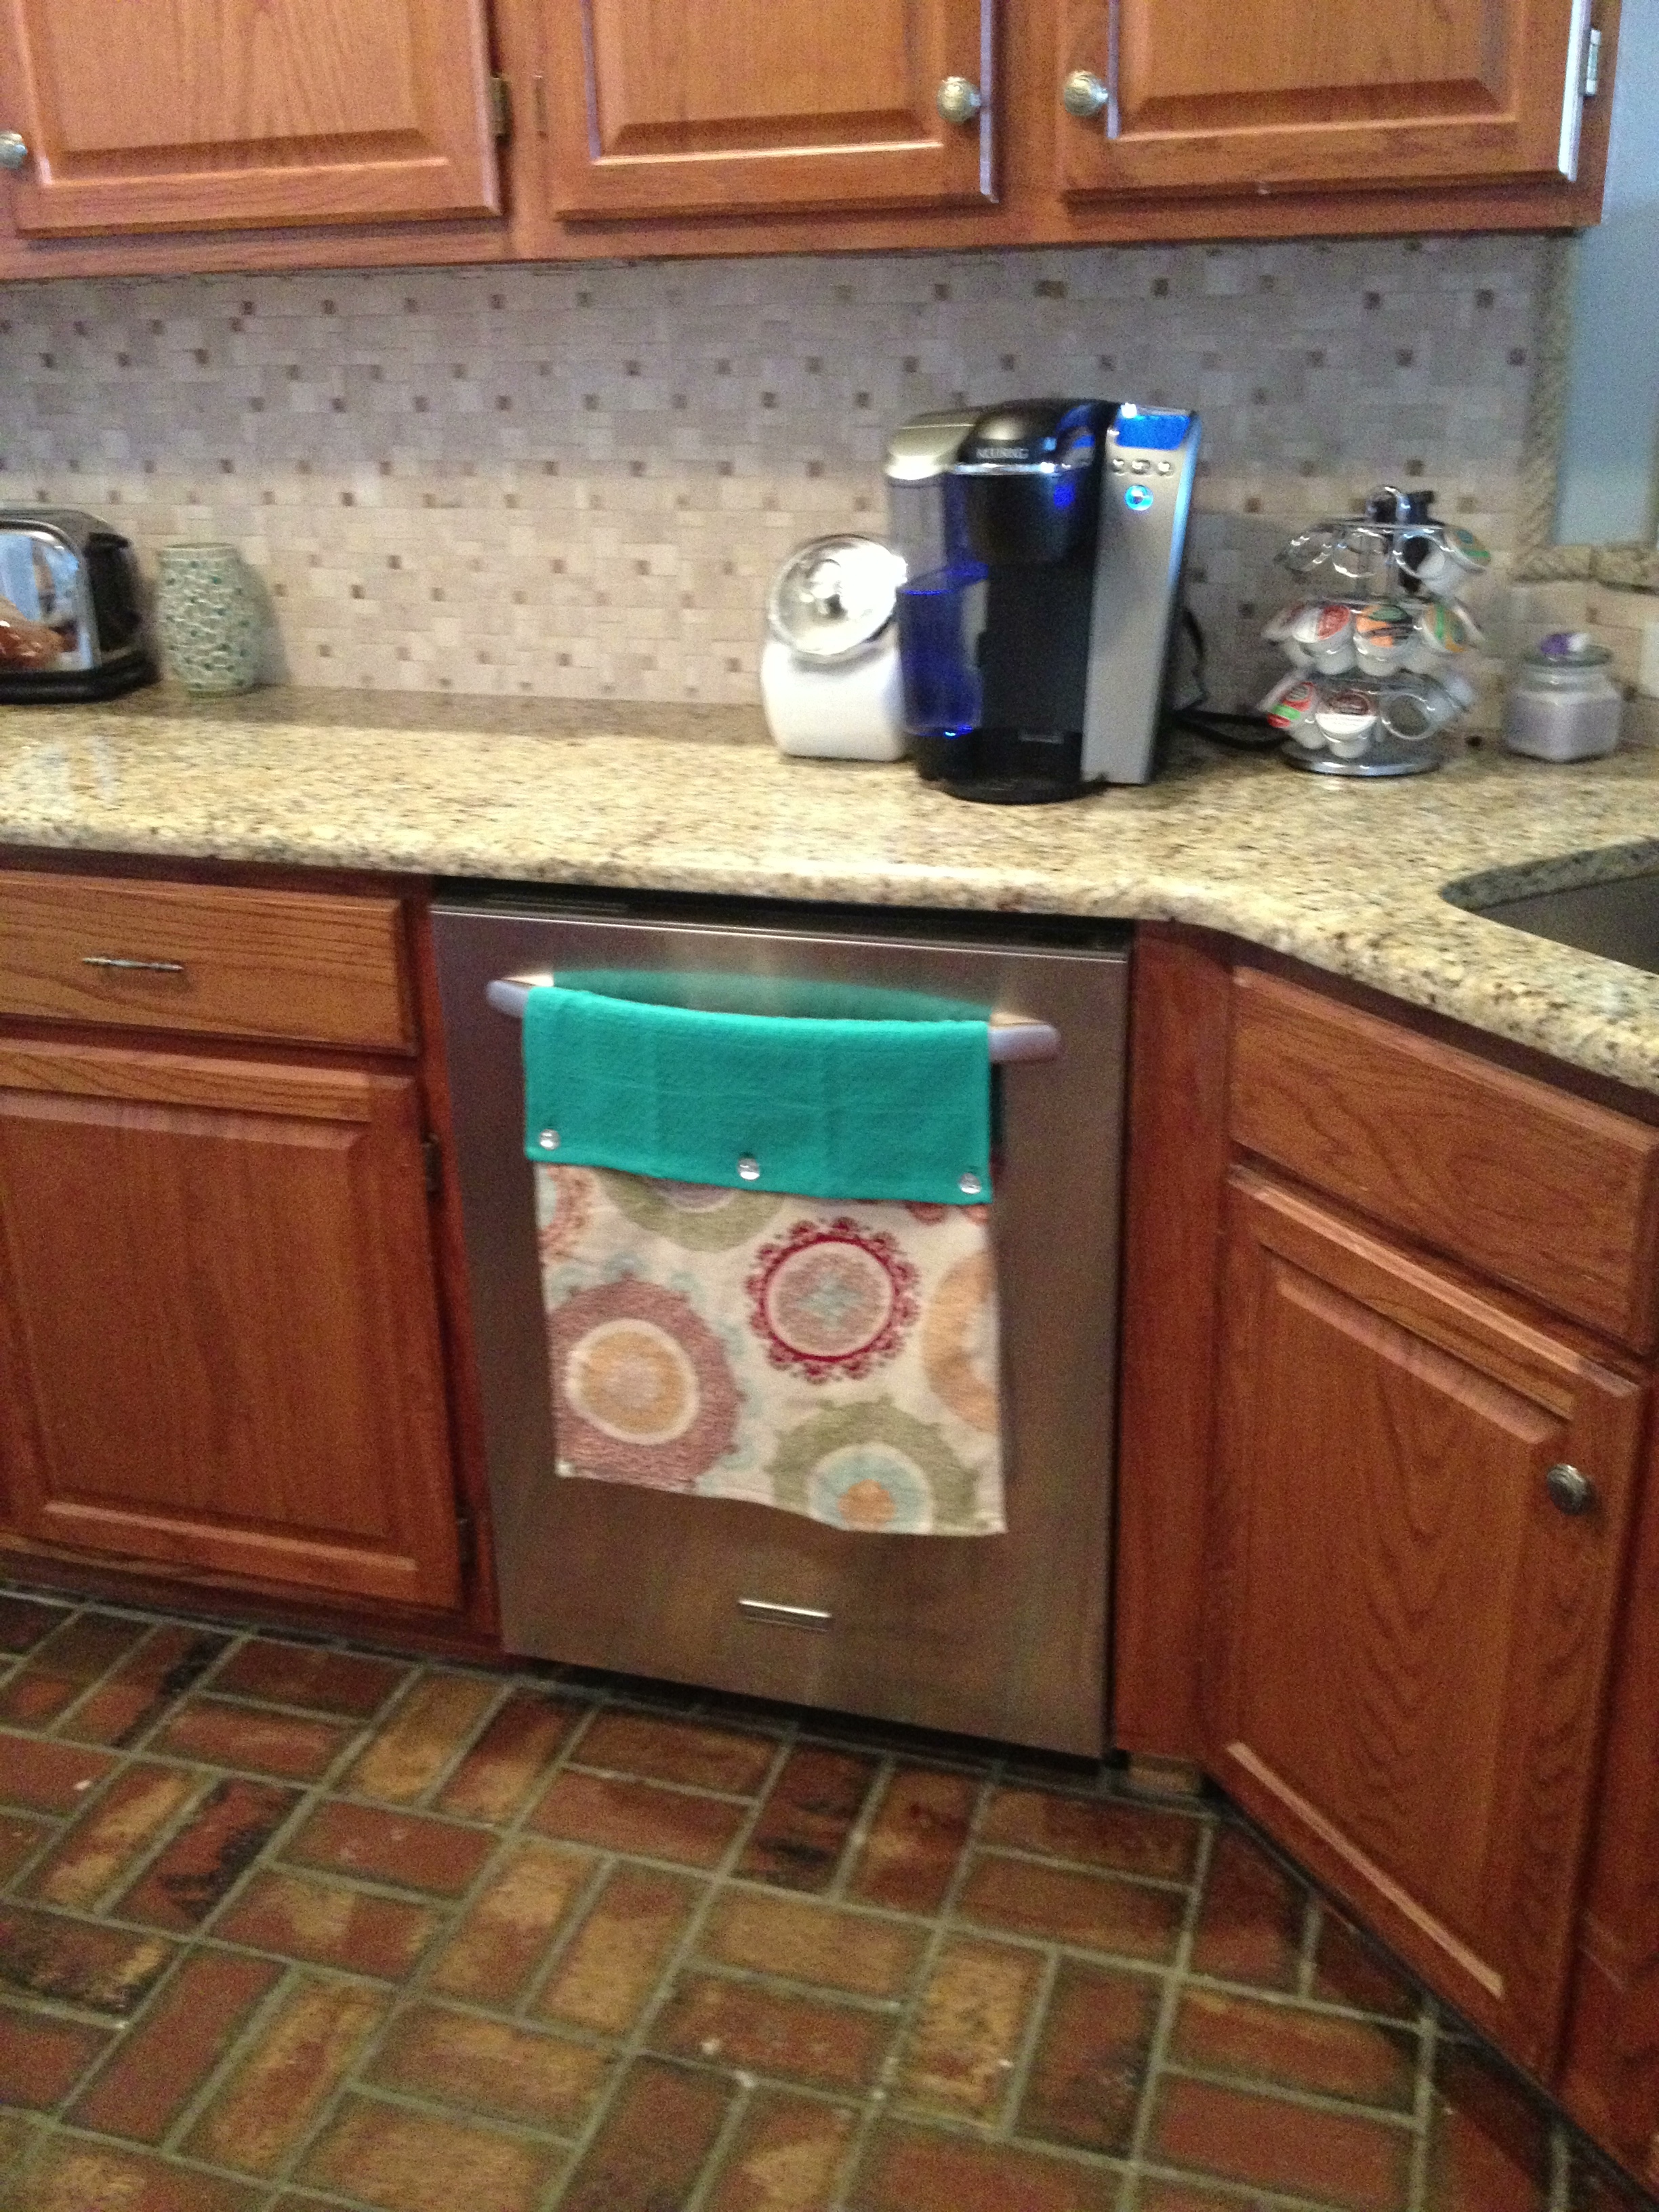 One Brilliant Trick to Keep Your Kitchen Towels Looking Great